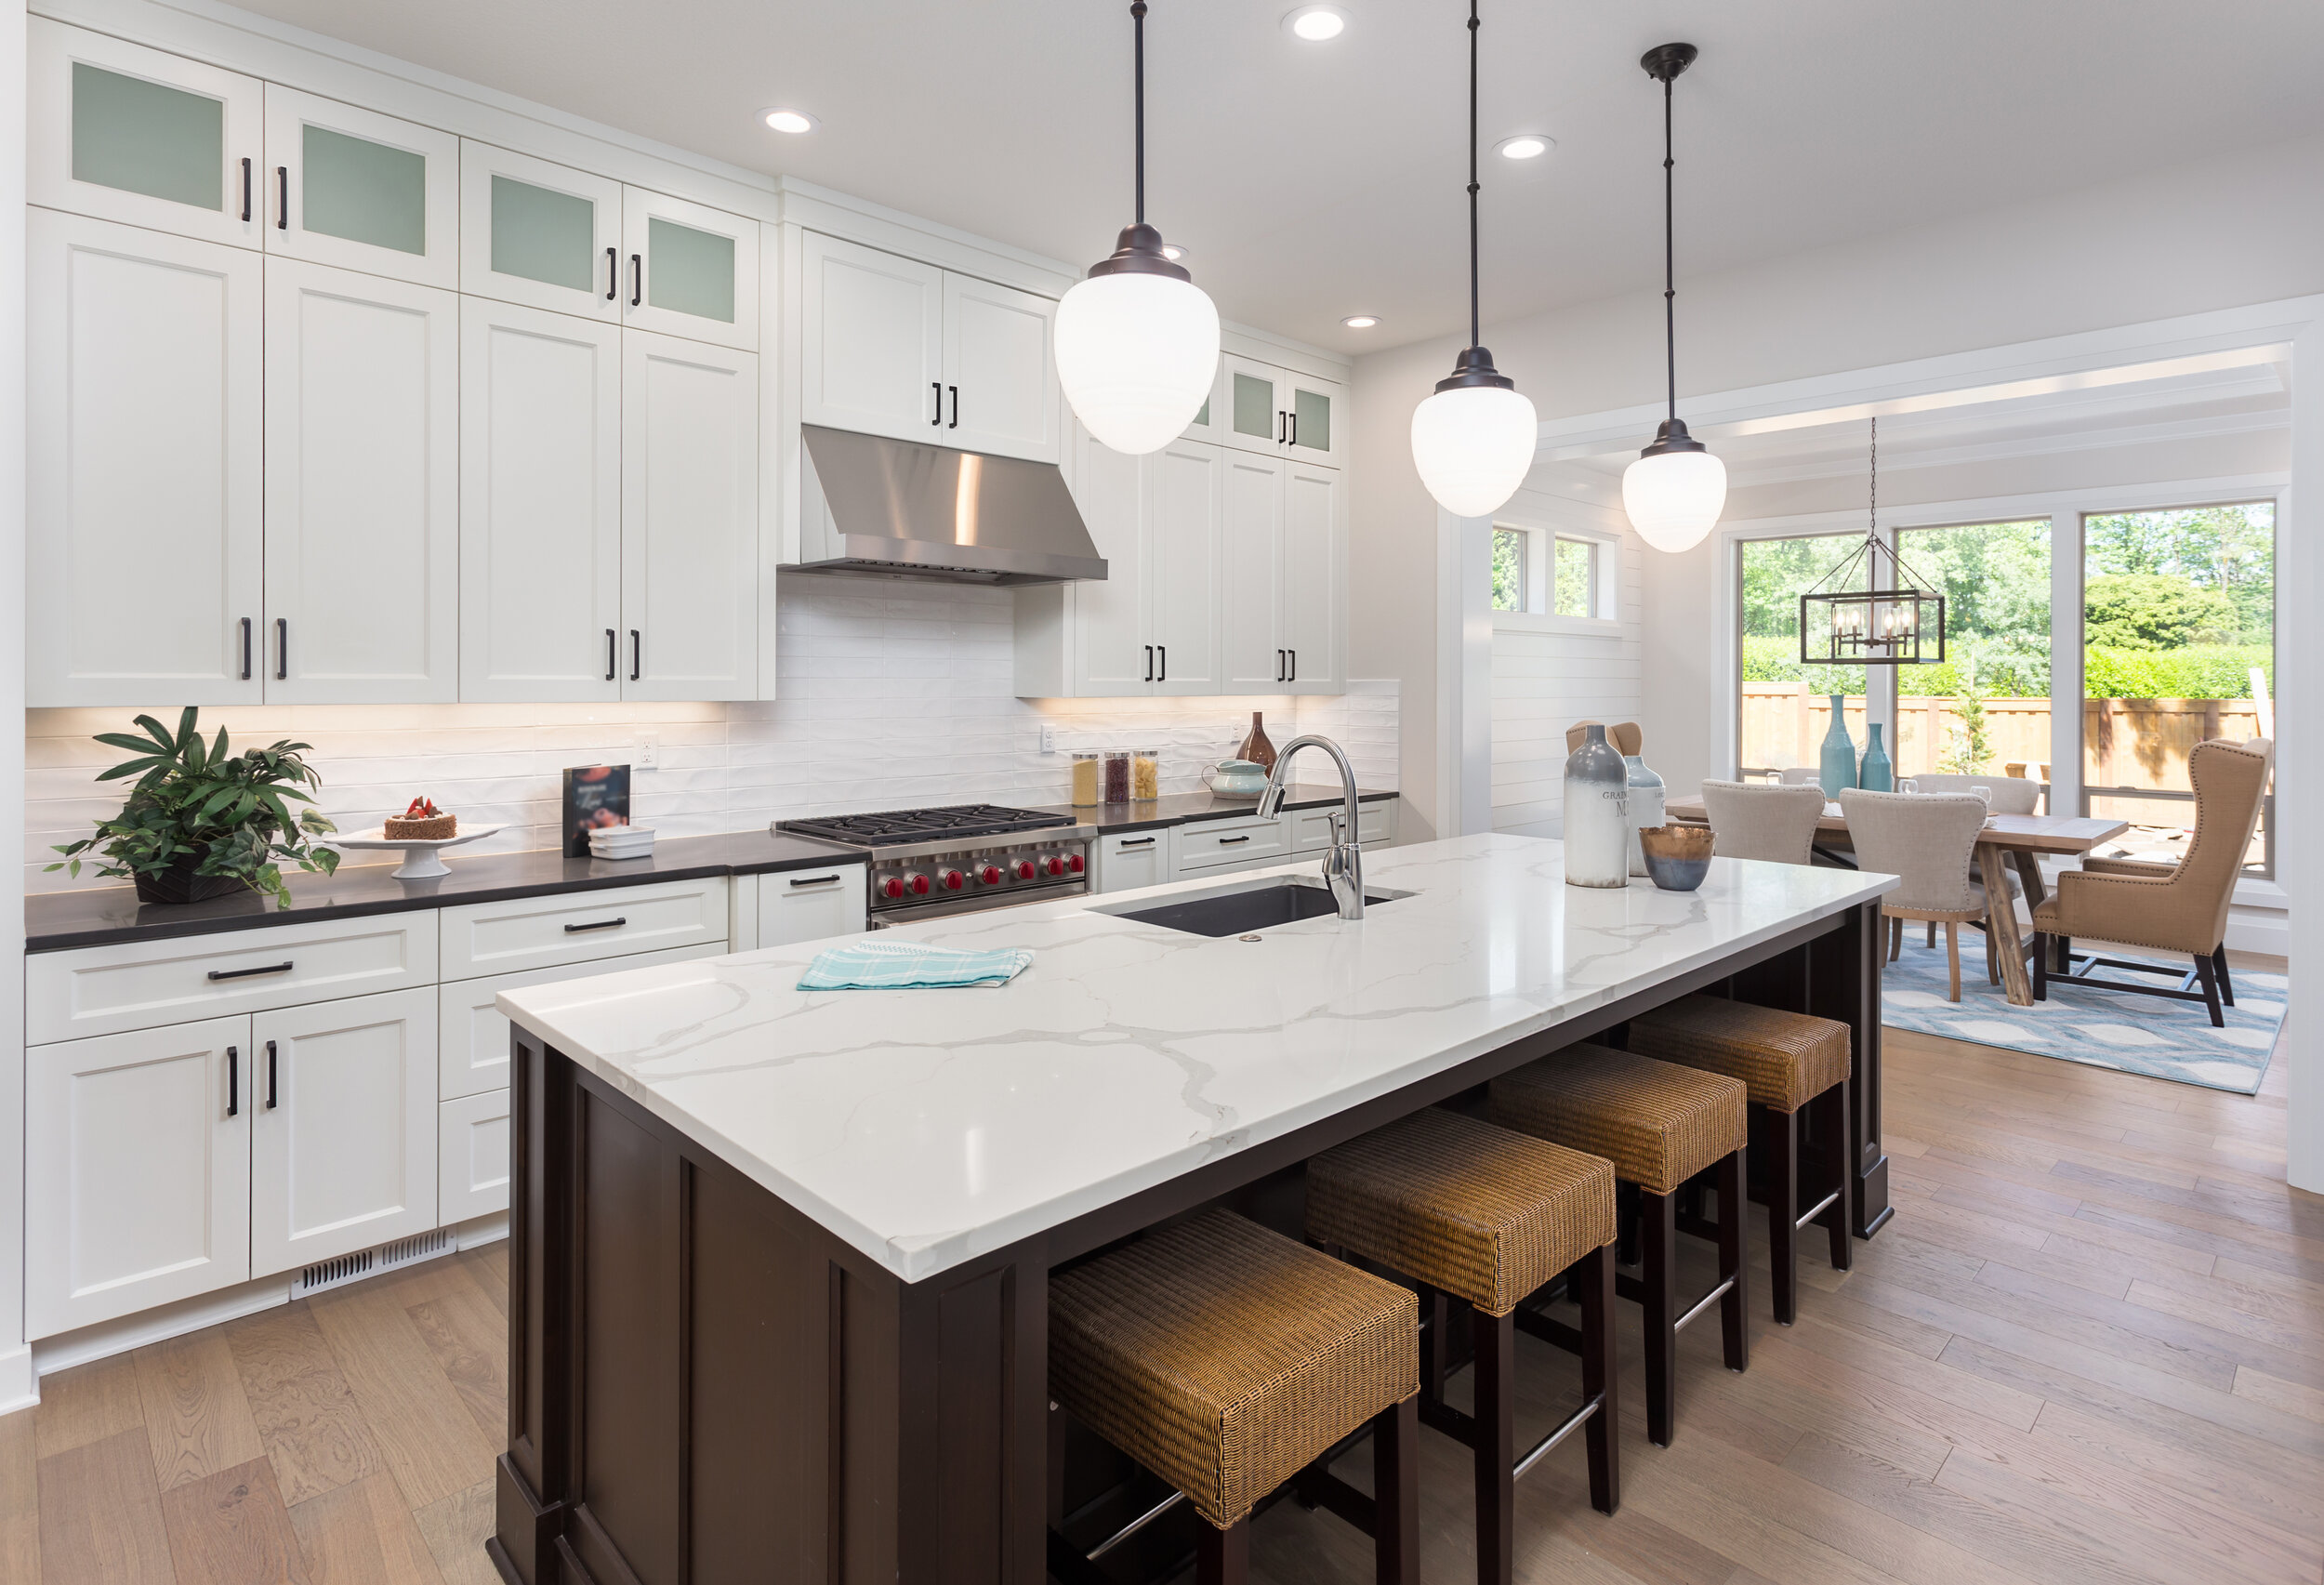 beautiful-kitchen-in-new-luxury-home-with-island,-pendant-lights,-and-hardwood-floors.-Includes-view-of-dining-room.-692601402_4000x2728.jpeg